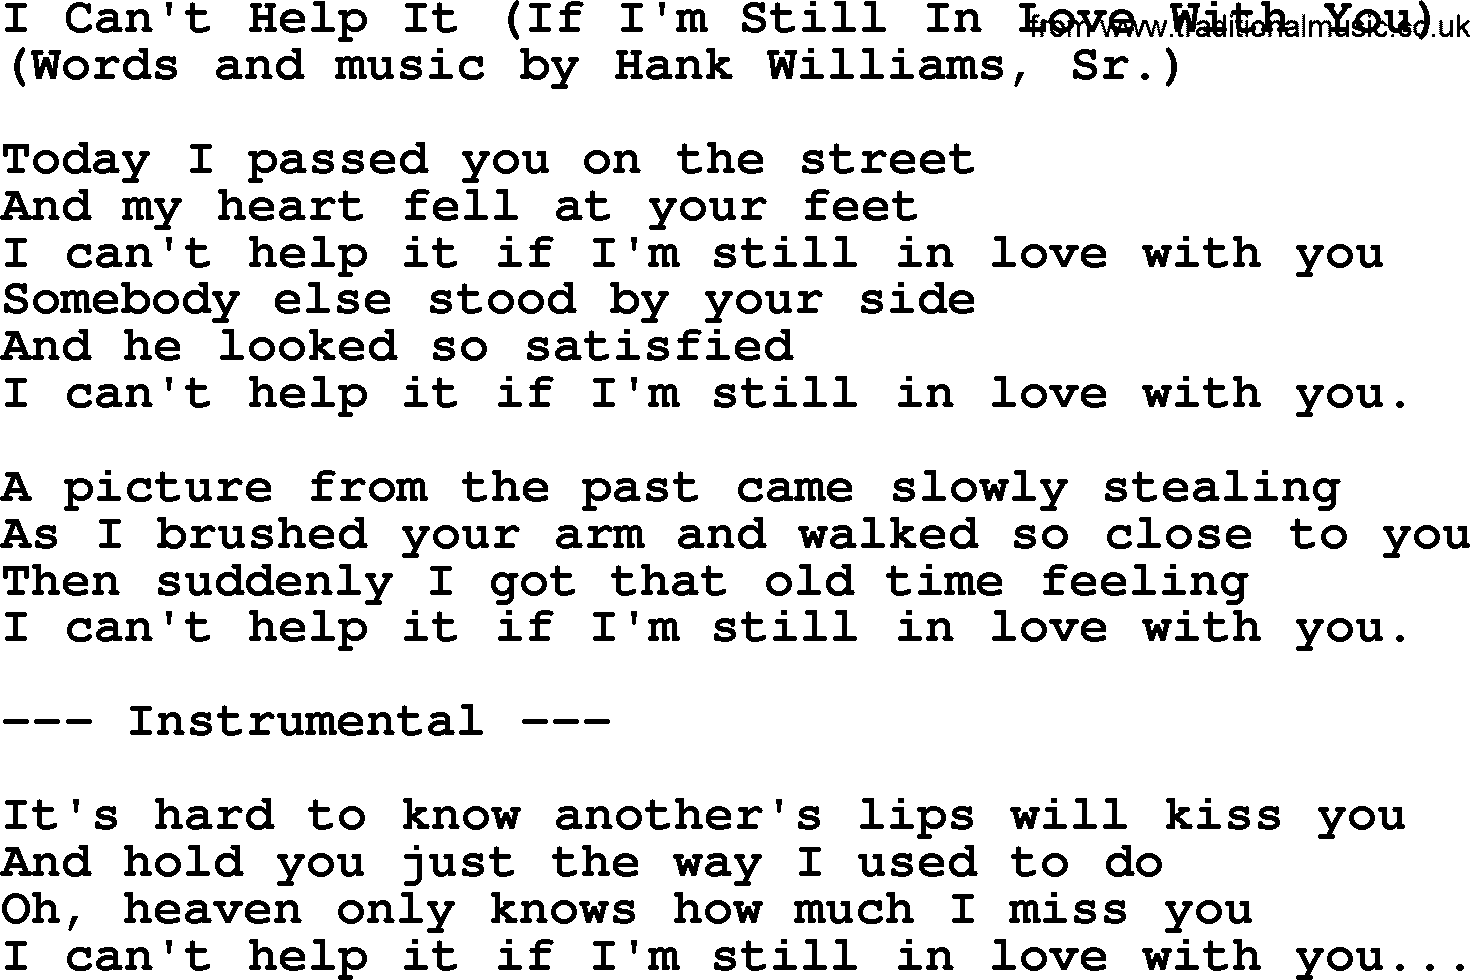 George Jones song: I Can't Help It (if I'm Still In Love With You), lyrics